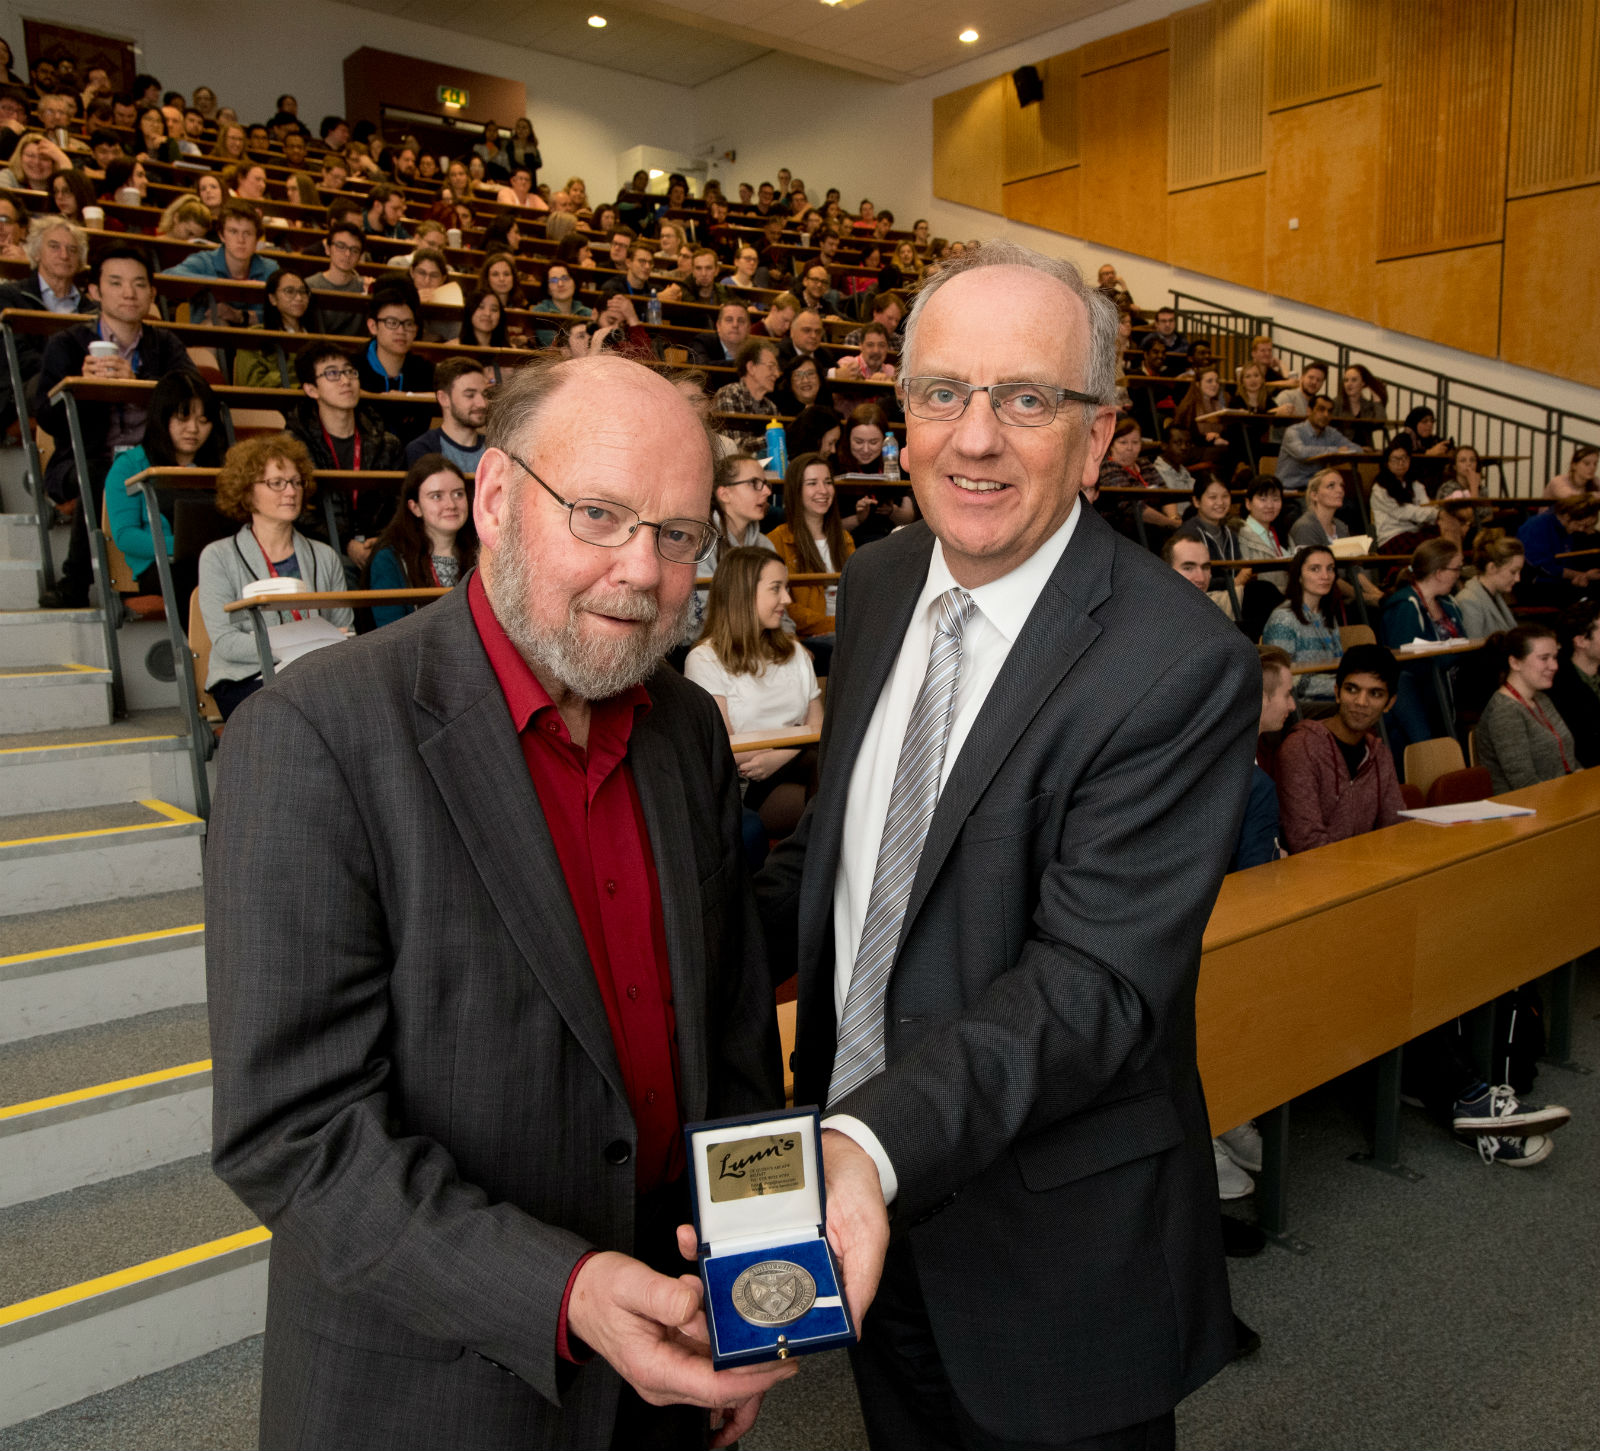 Sir Ian Wilmut receiving the Barcroft Medal from Professor Pascal McKeown